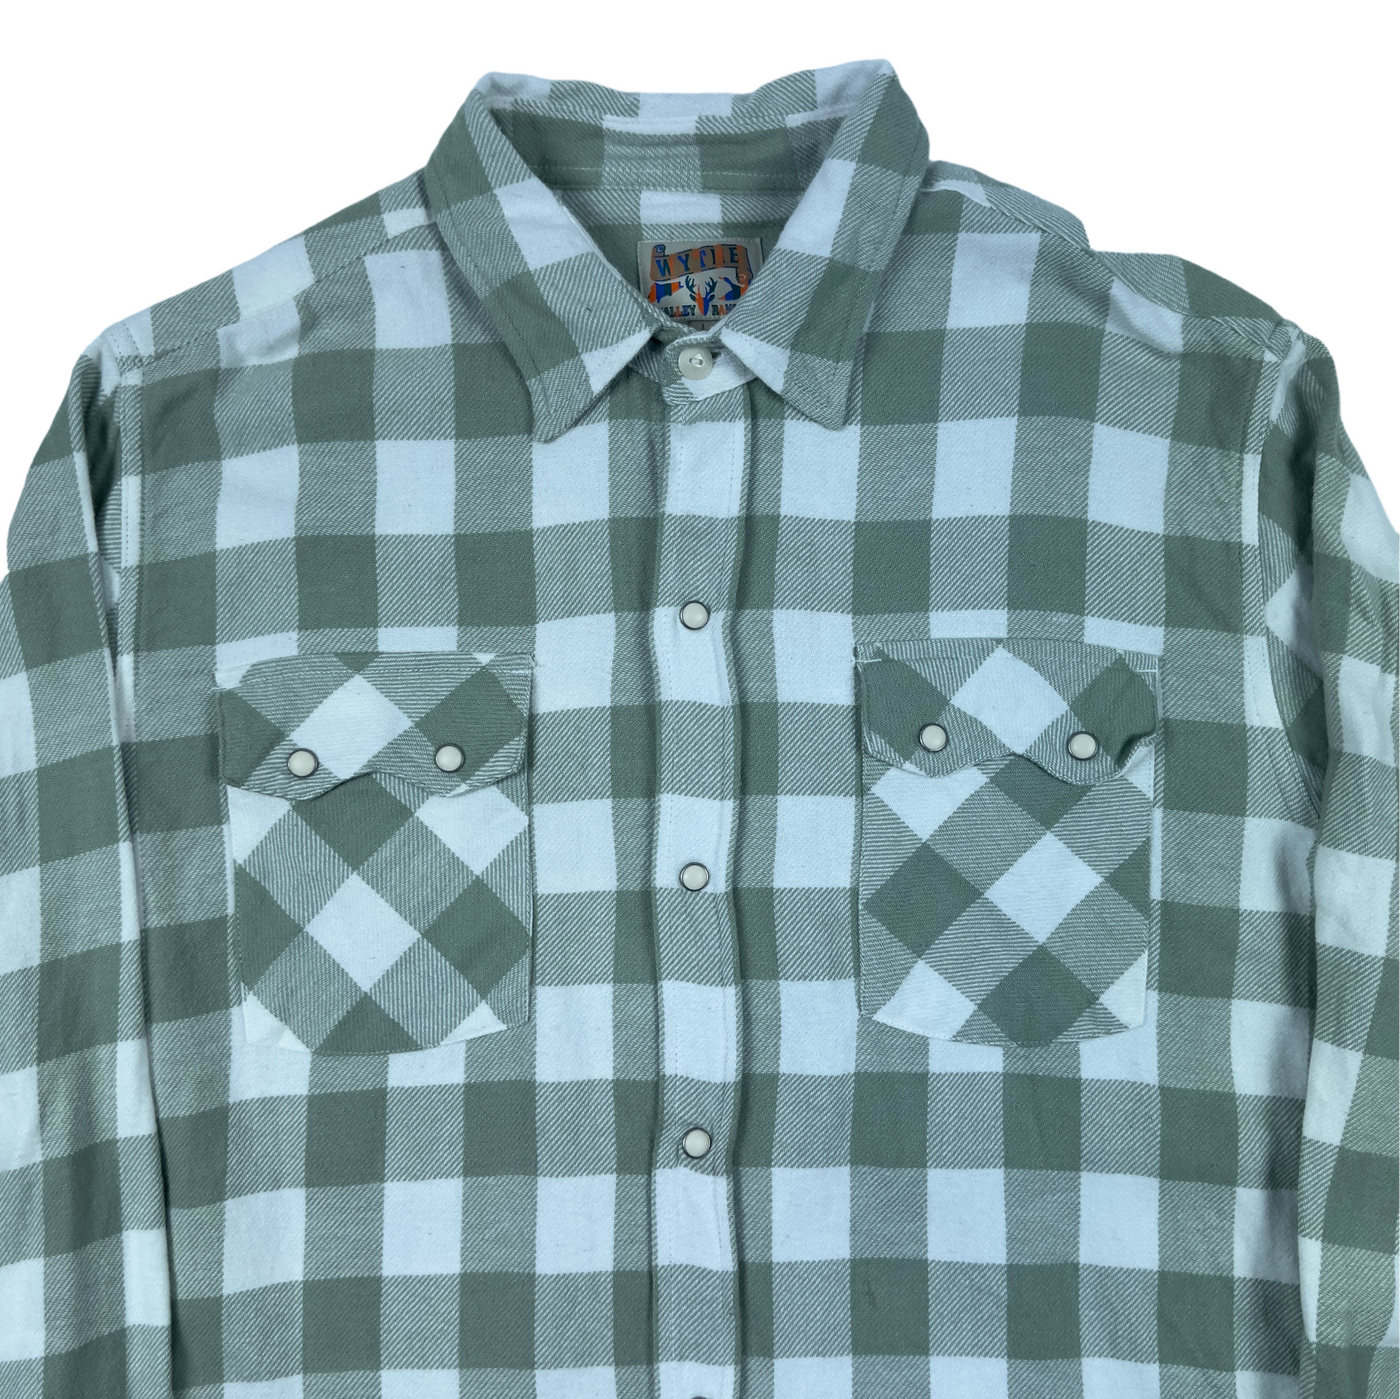 Pearlsnap Flannel